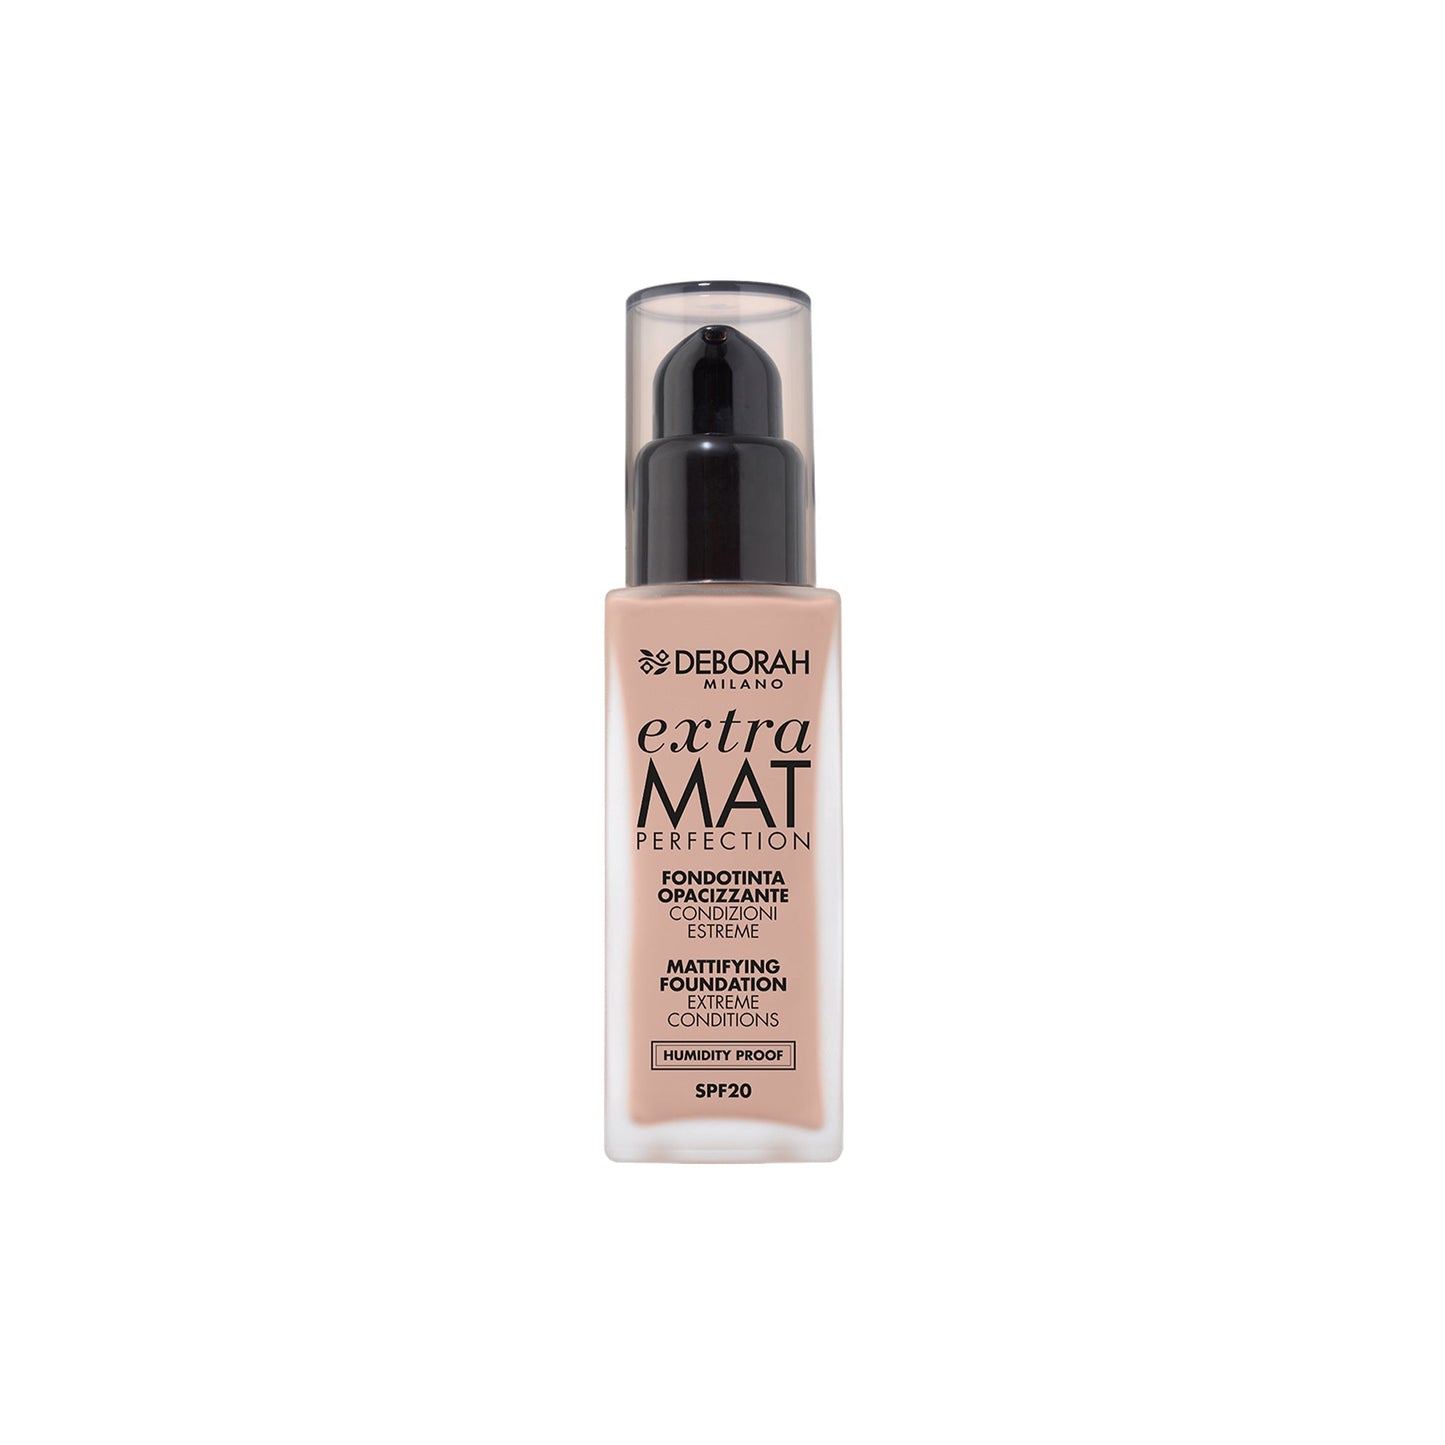 Extra Mat Perfection Foundation